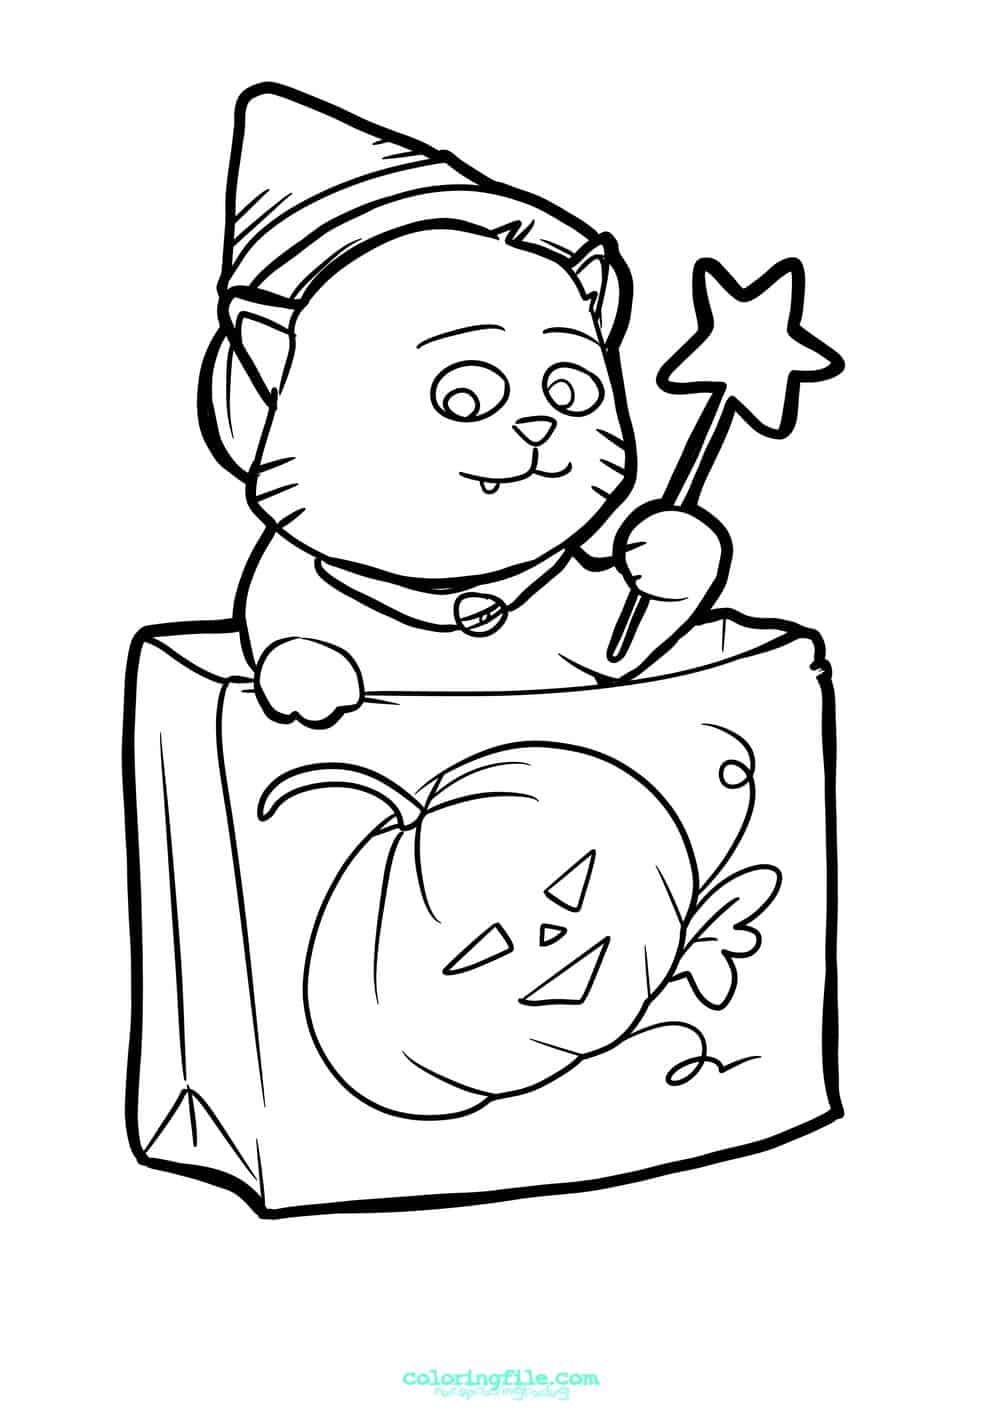 Cat in a bag halloween coloring pages